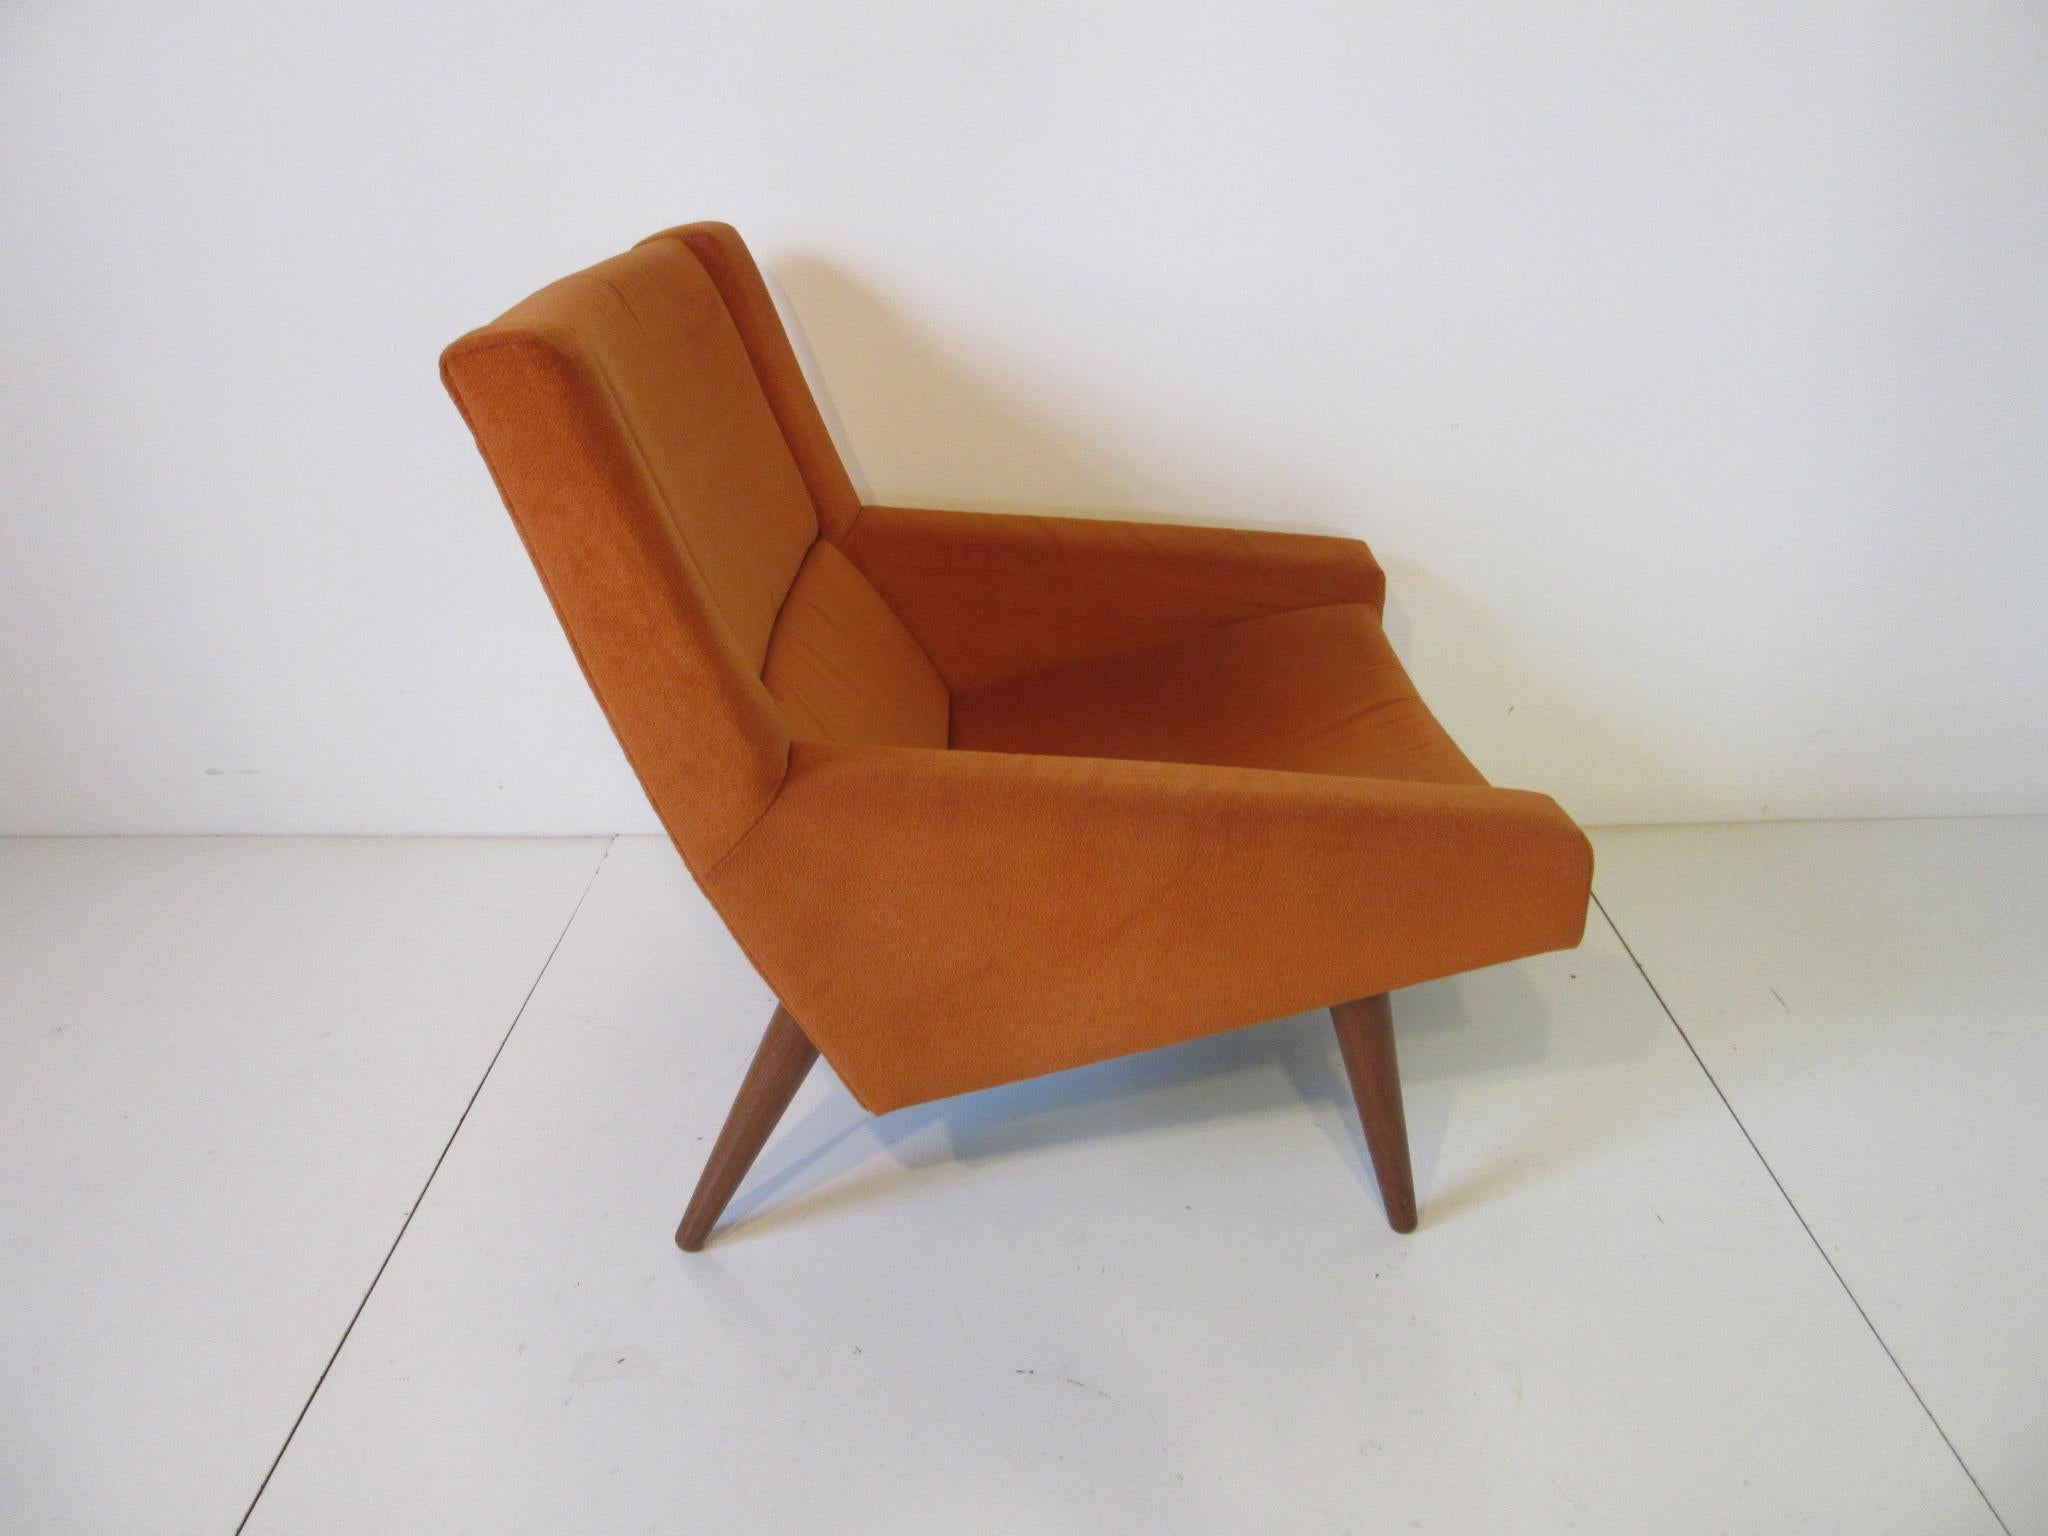 A well crafted upholstered lounge chair in a soft orange fabric with conical solid teak wood legs and having an interesting ergonomically designed shape for comfort. Purchased by the original owners in Denmark and lovingly cared for until their